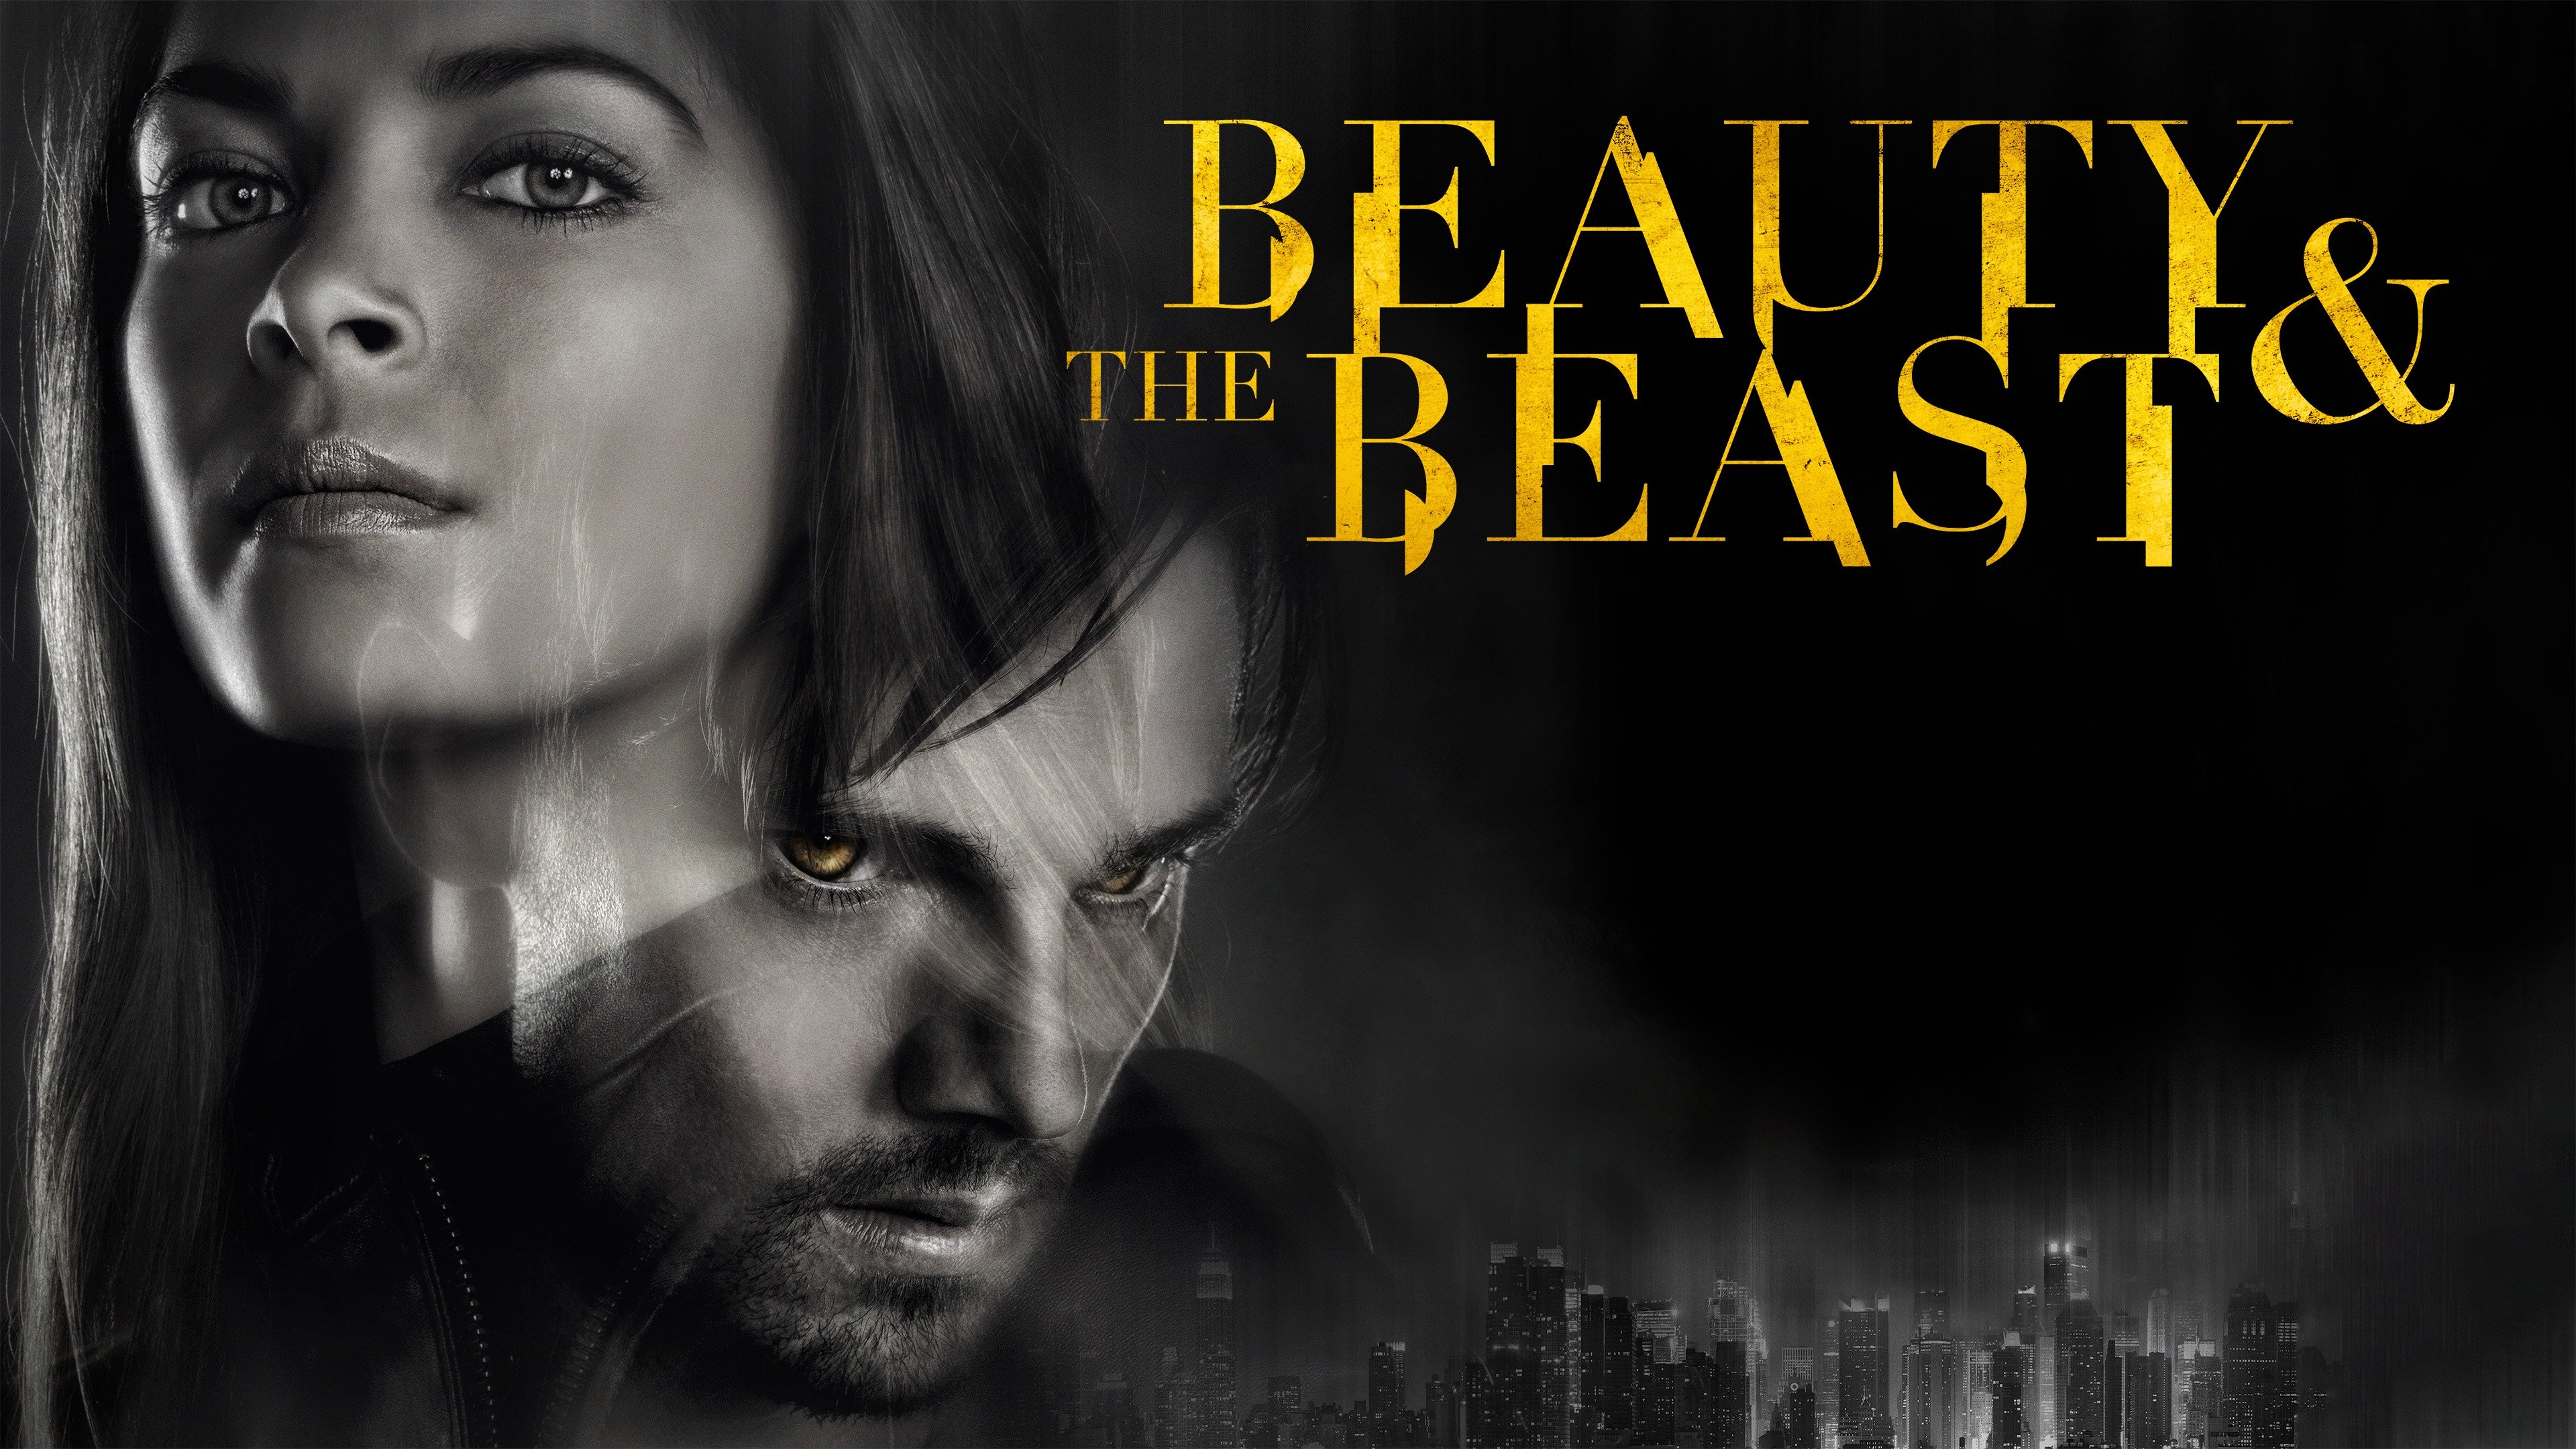 TV Show Beauty and the Beast (2012) HD Wallpaper | Background Image